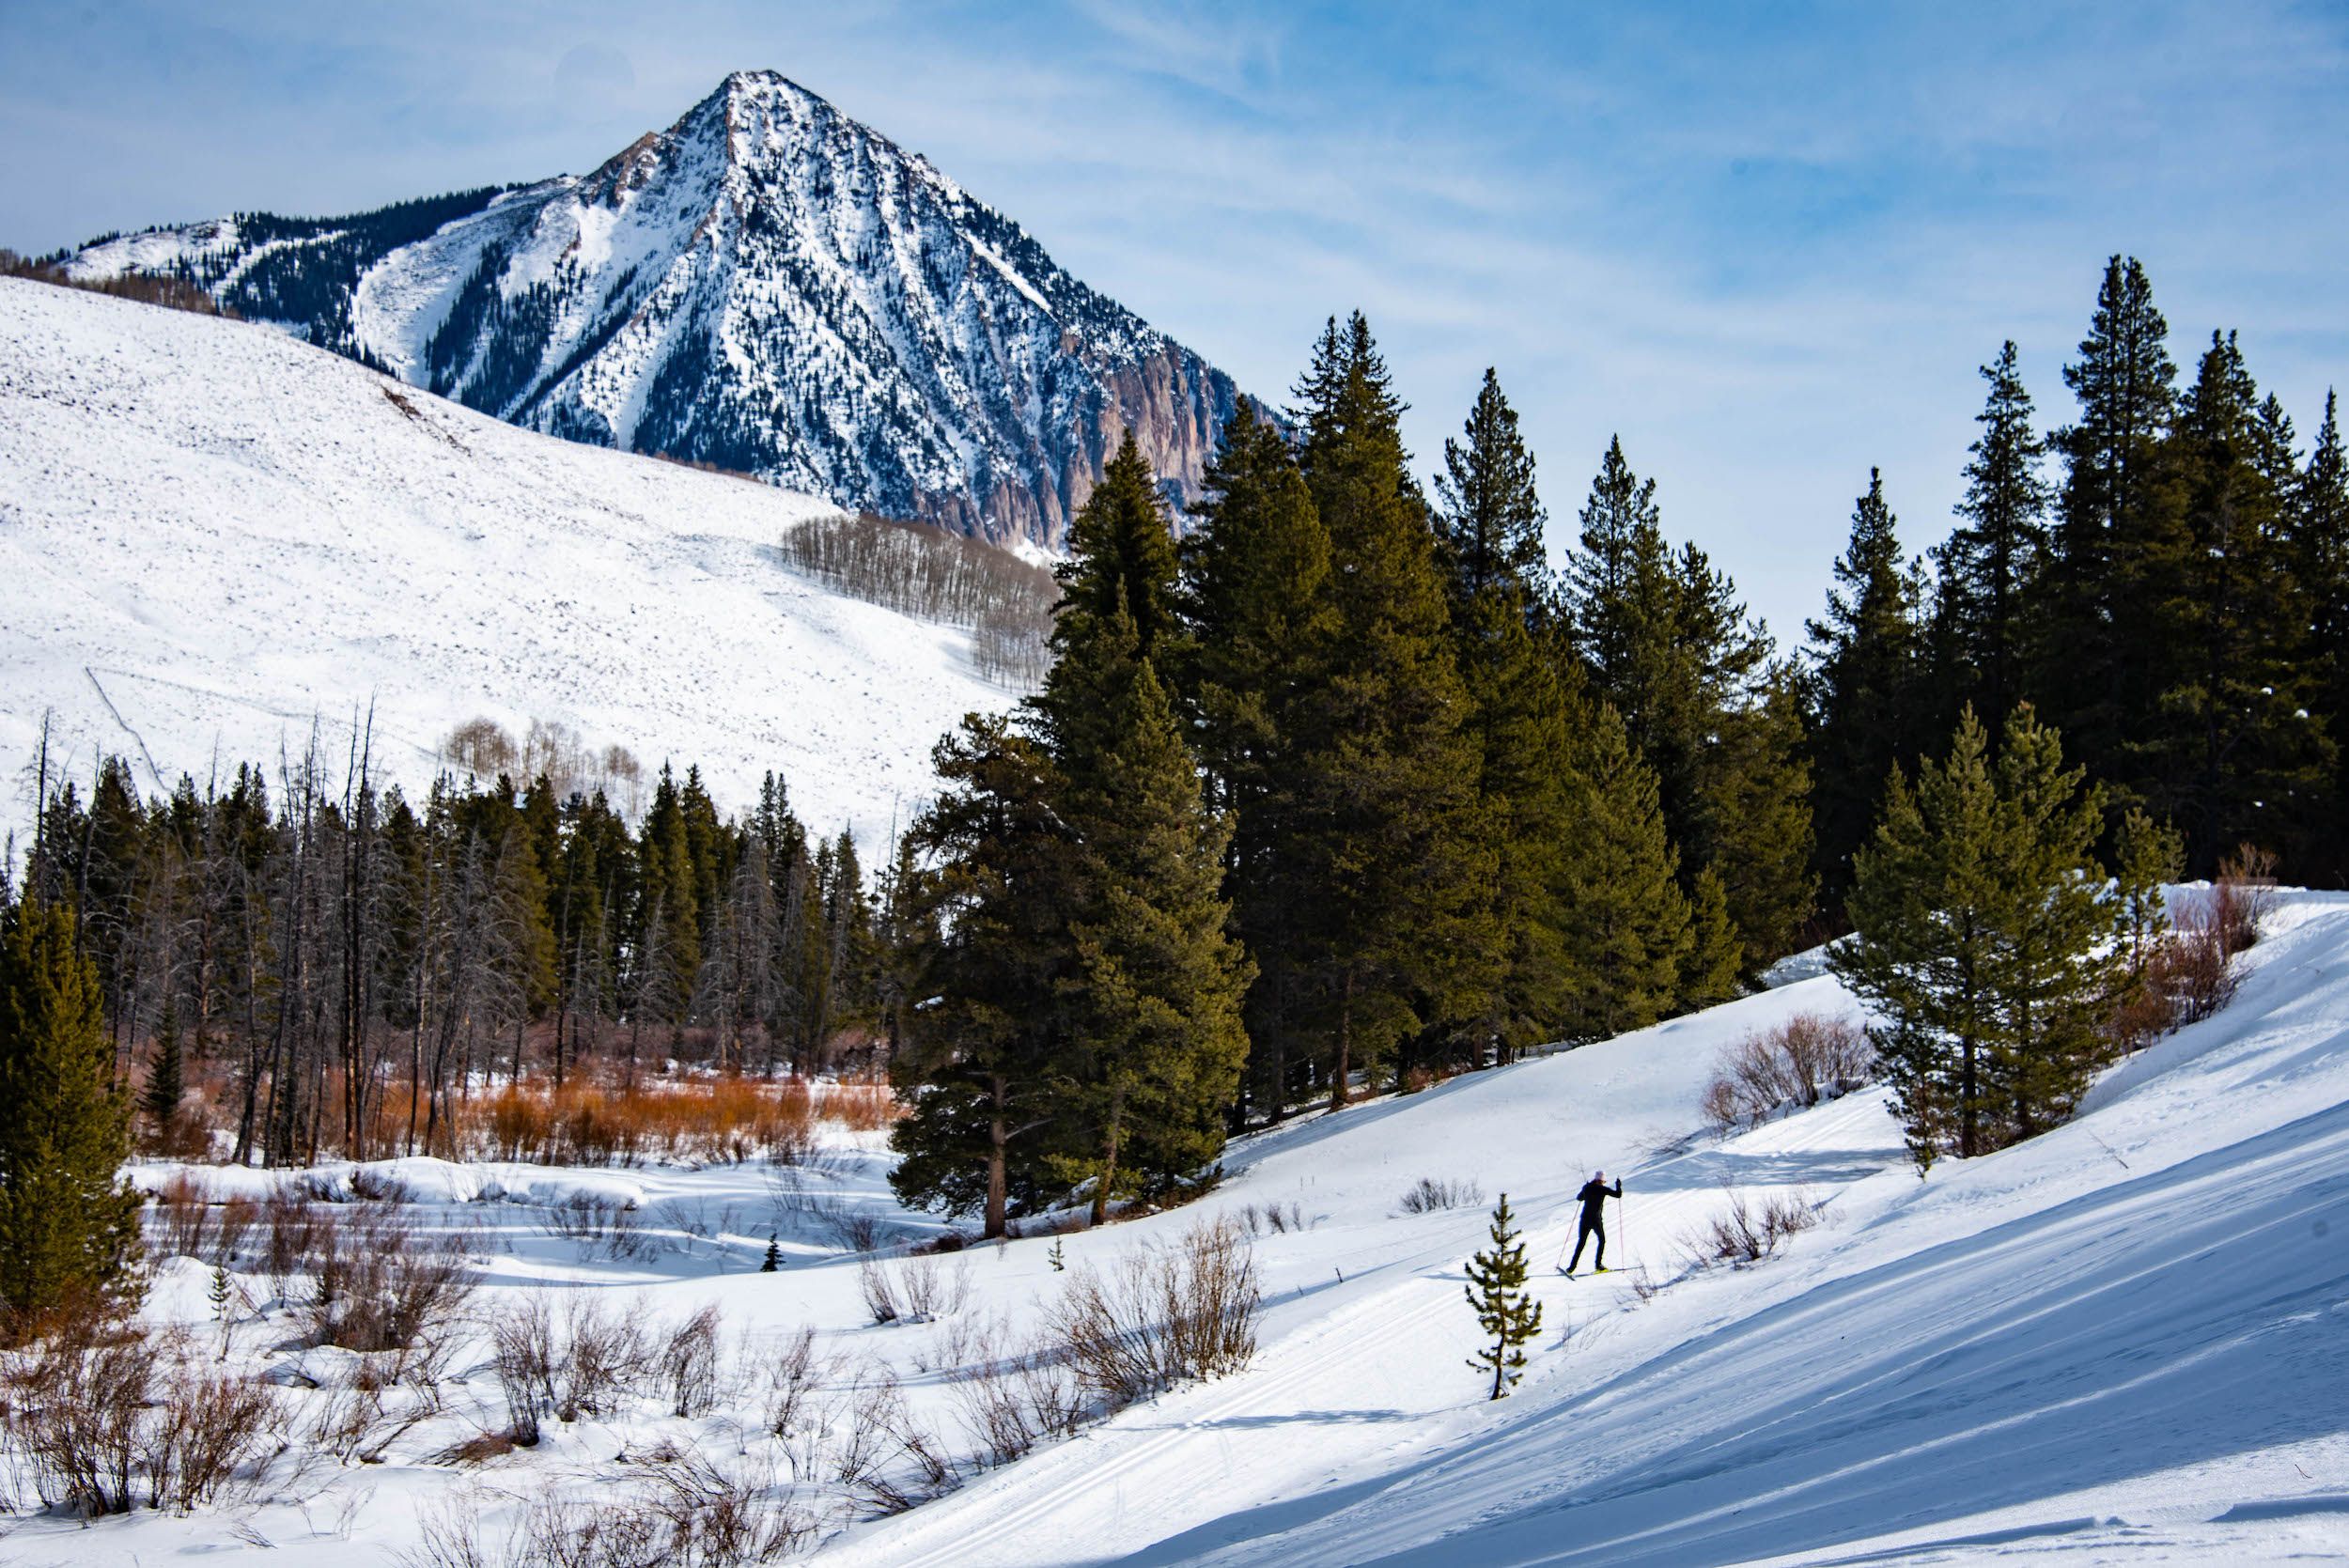 A cross-country skier heads up a trail lined with trees and a mountain peak in the background